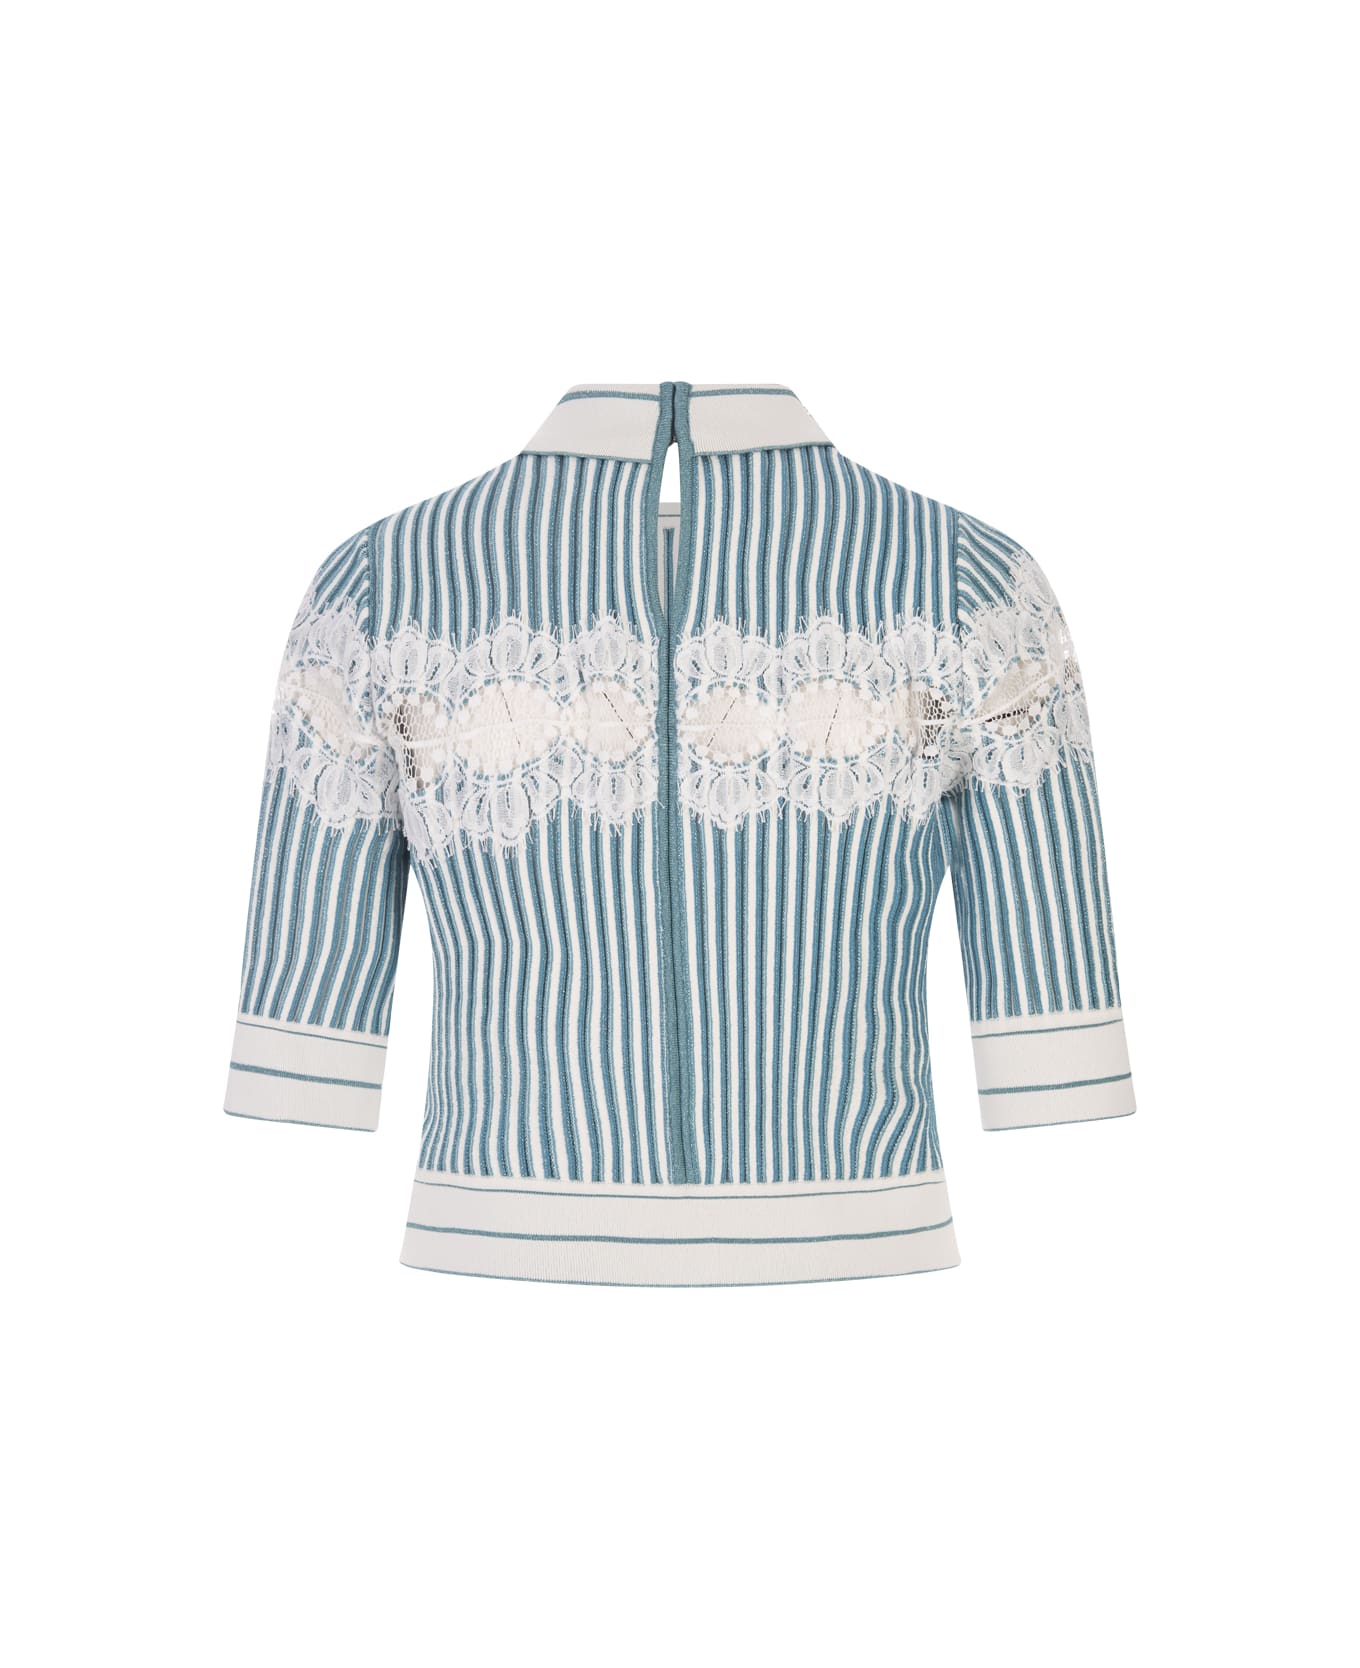 Elie Saab Polo Shirt In White And Blue Gin Knit And Lace - Blue